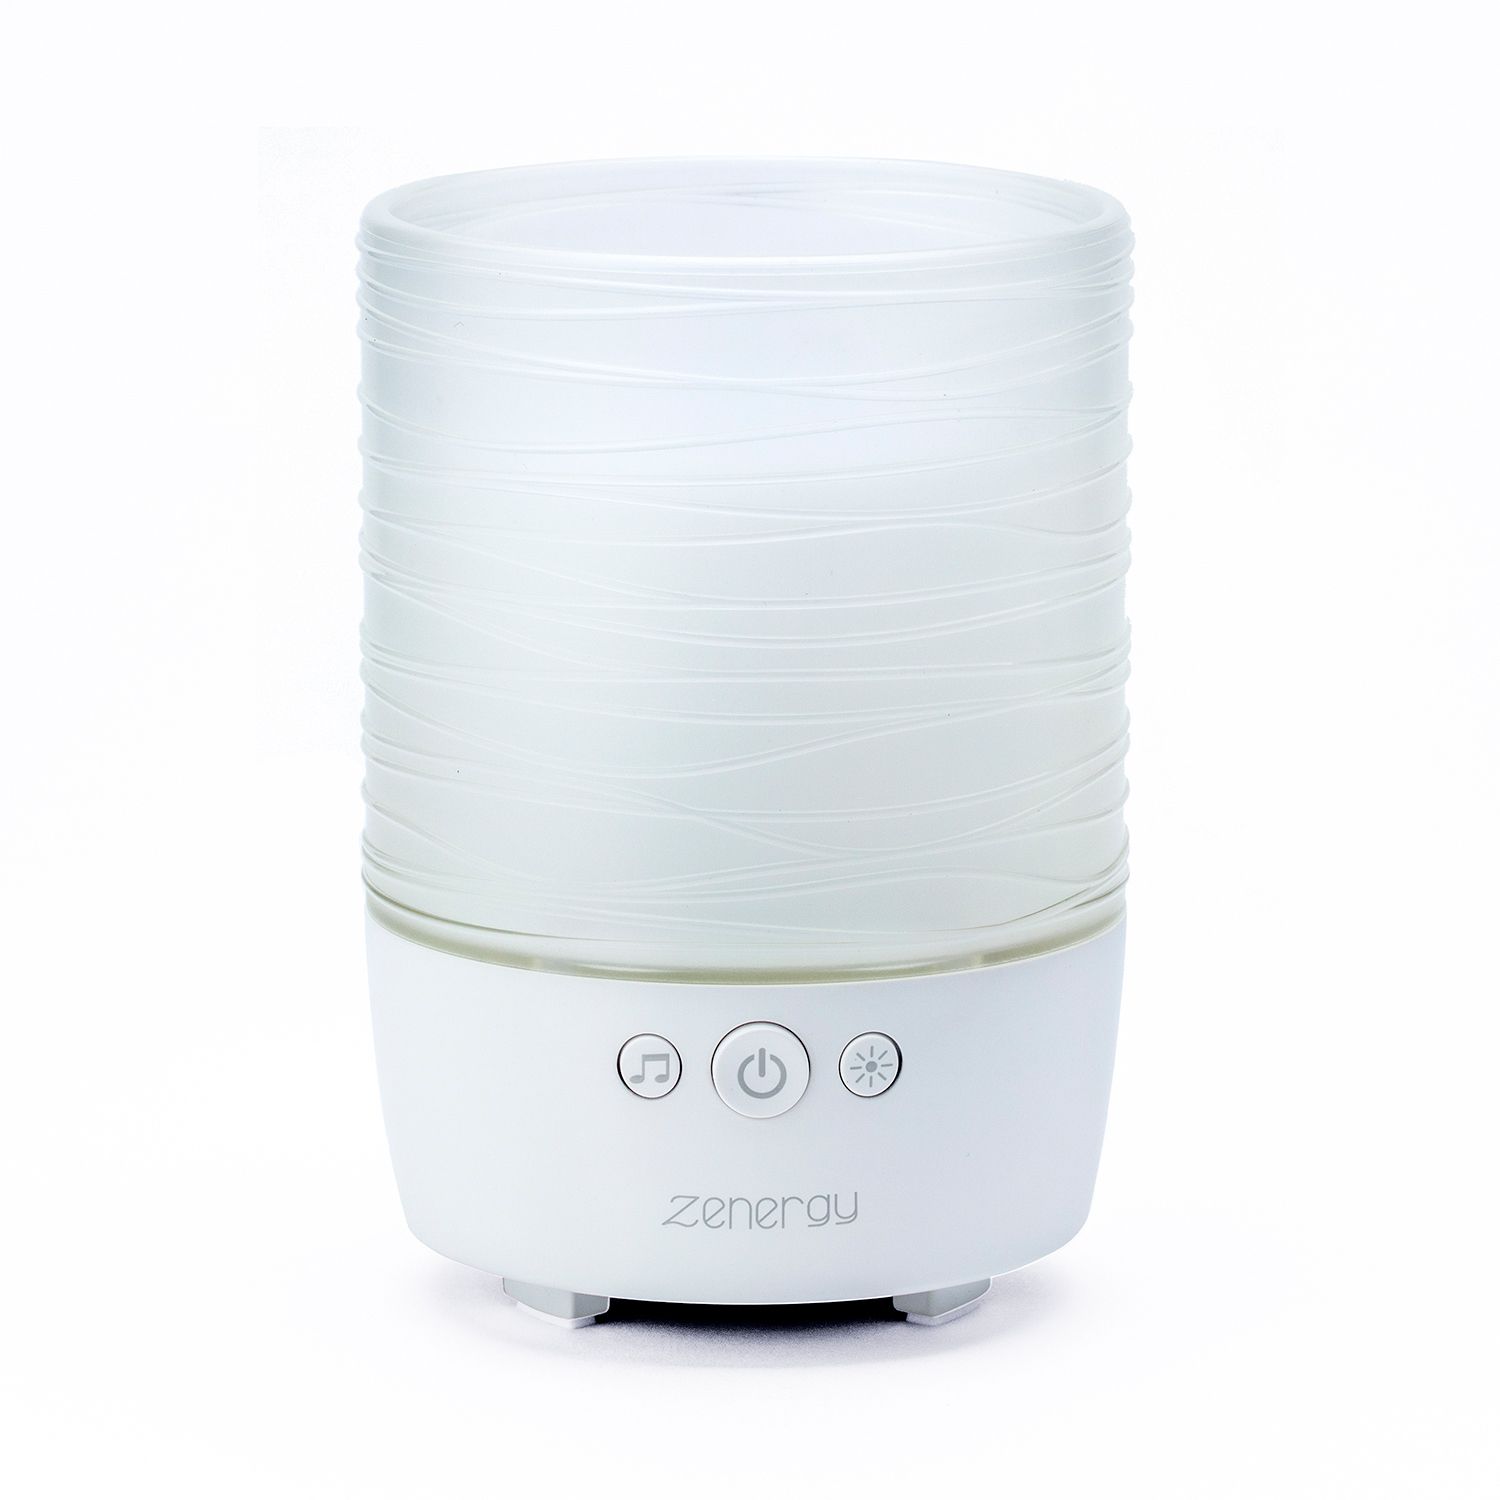 Image for iHome iZBT110WFT Portable Bluetooth Meditative Candle at Kohl's.